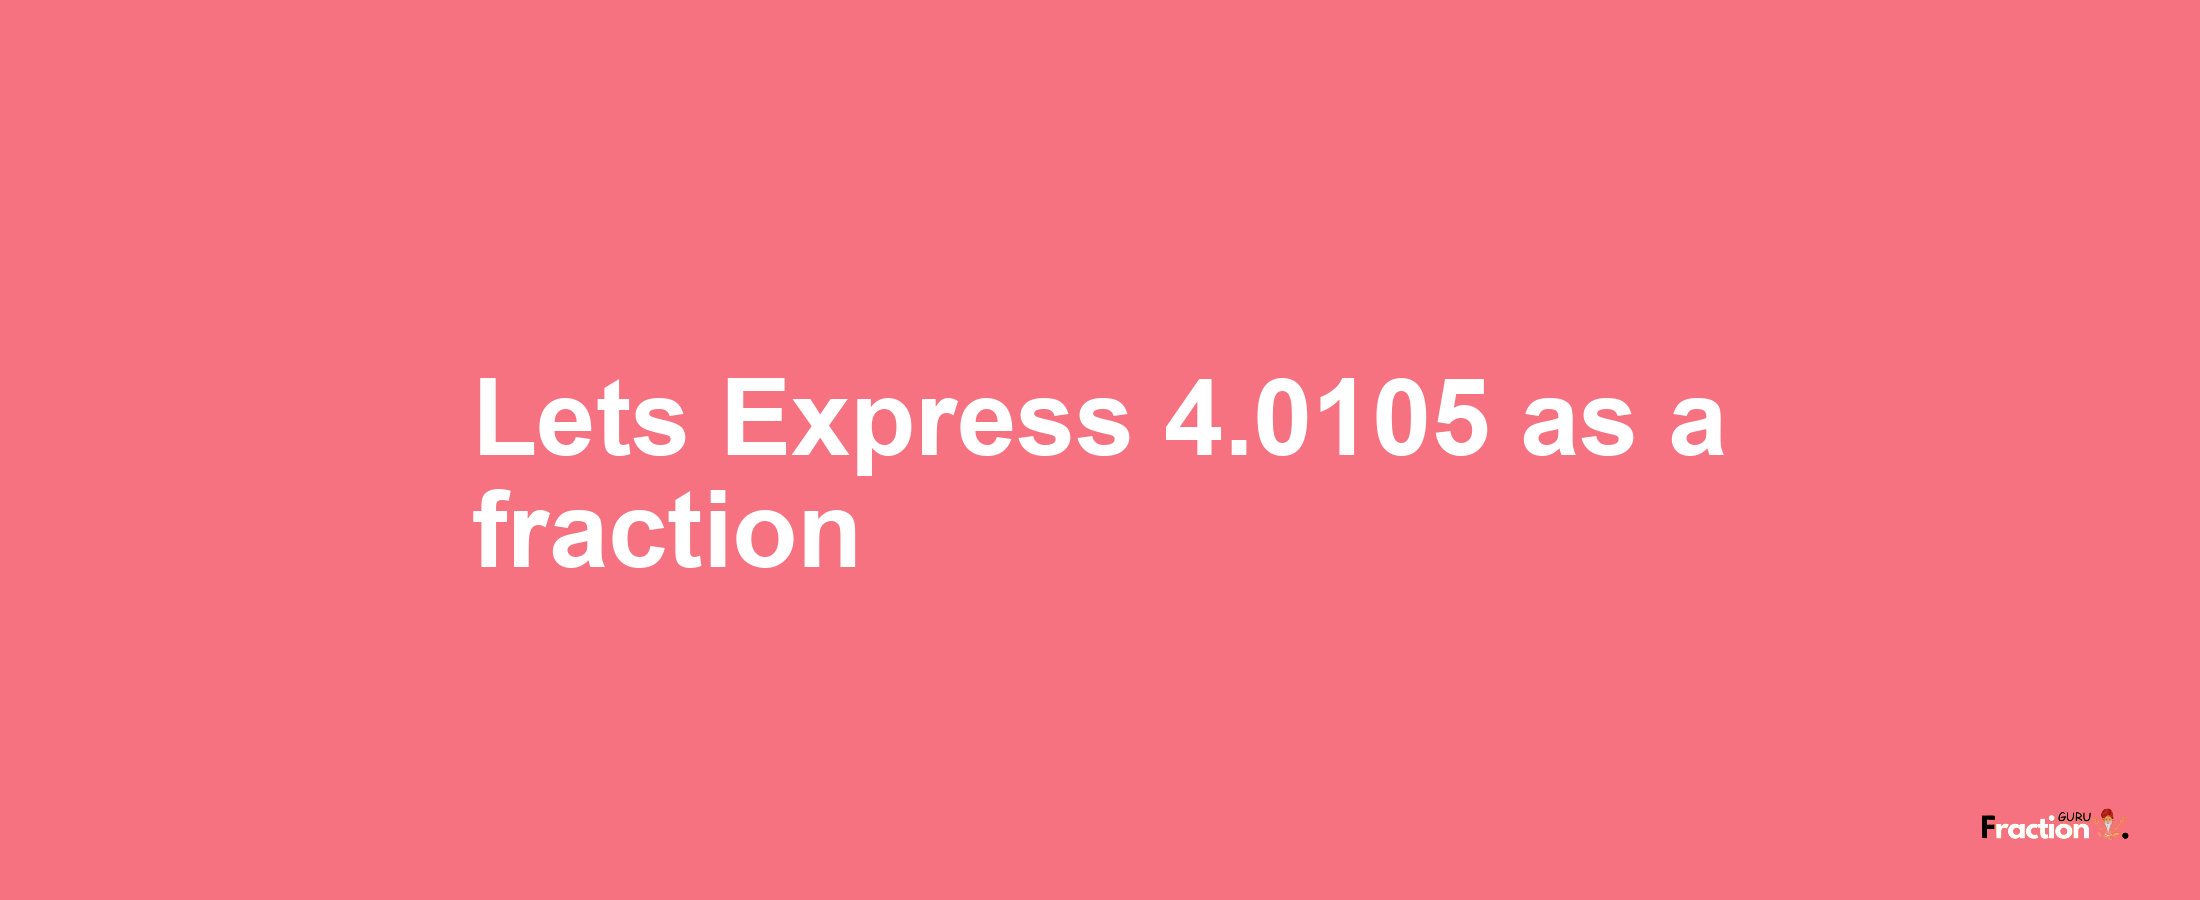 Lets Express 4.0105 as afraction